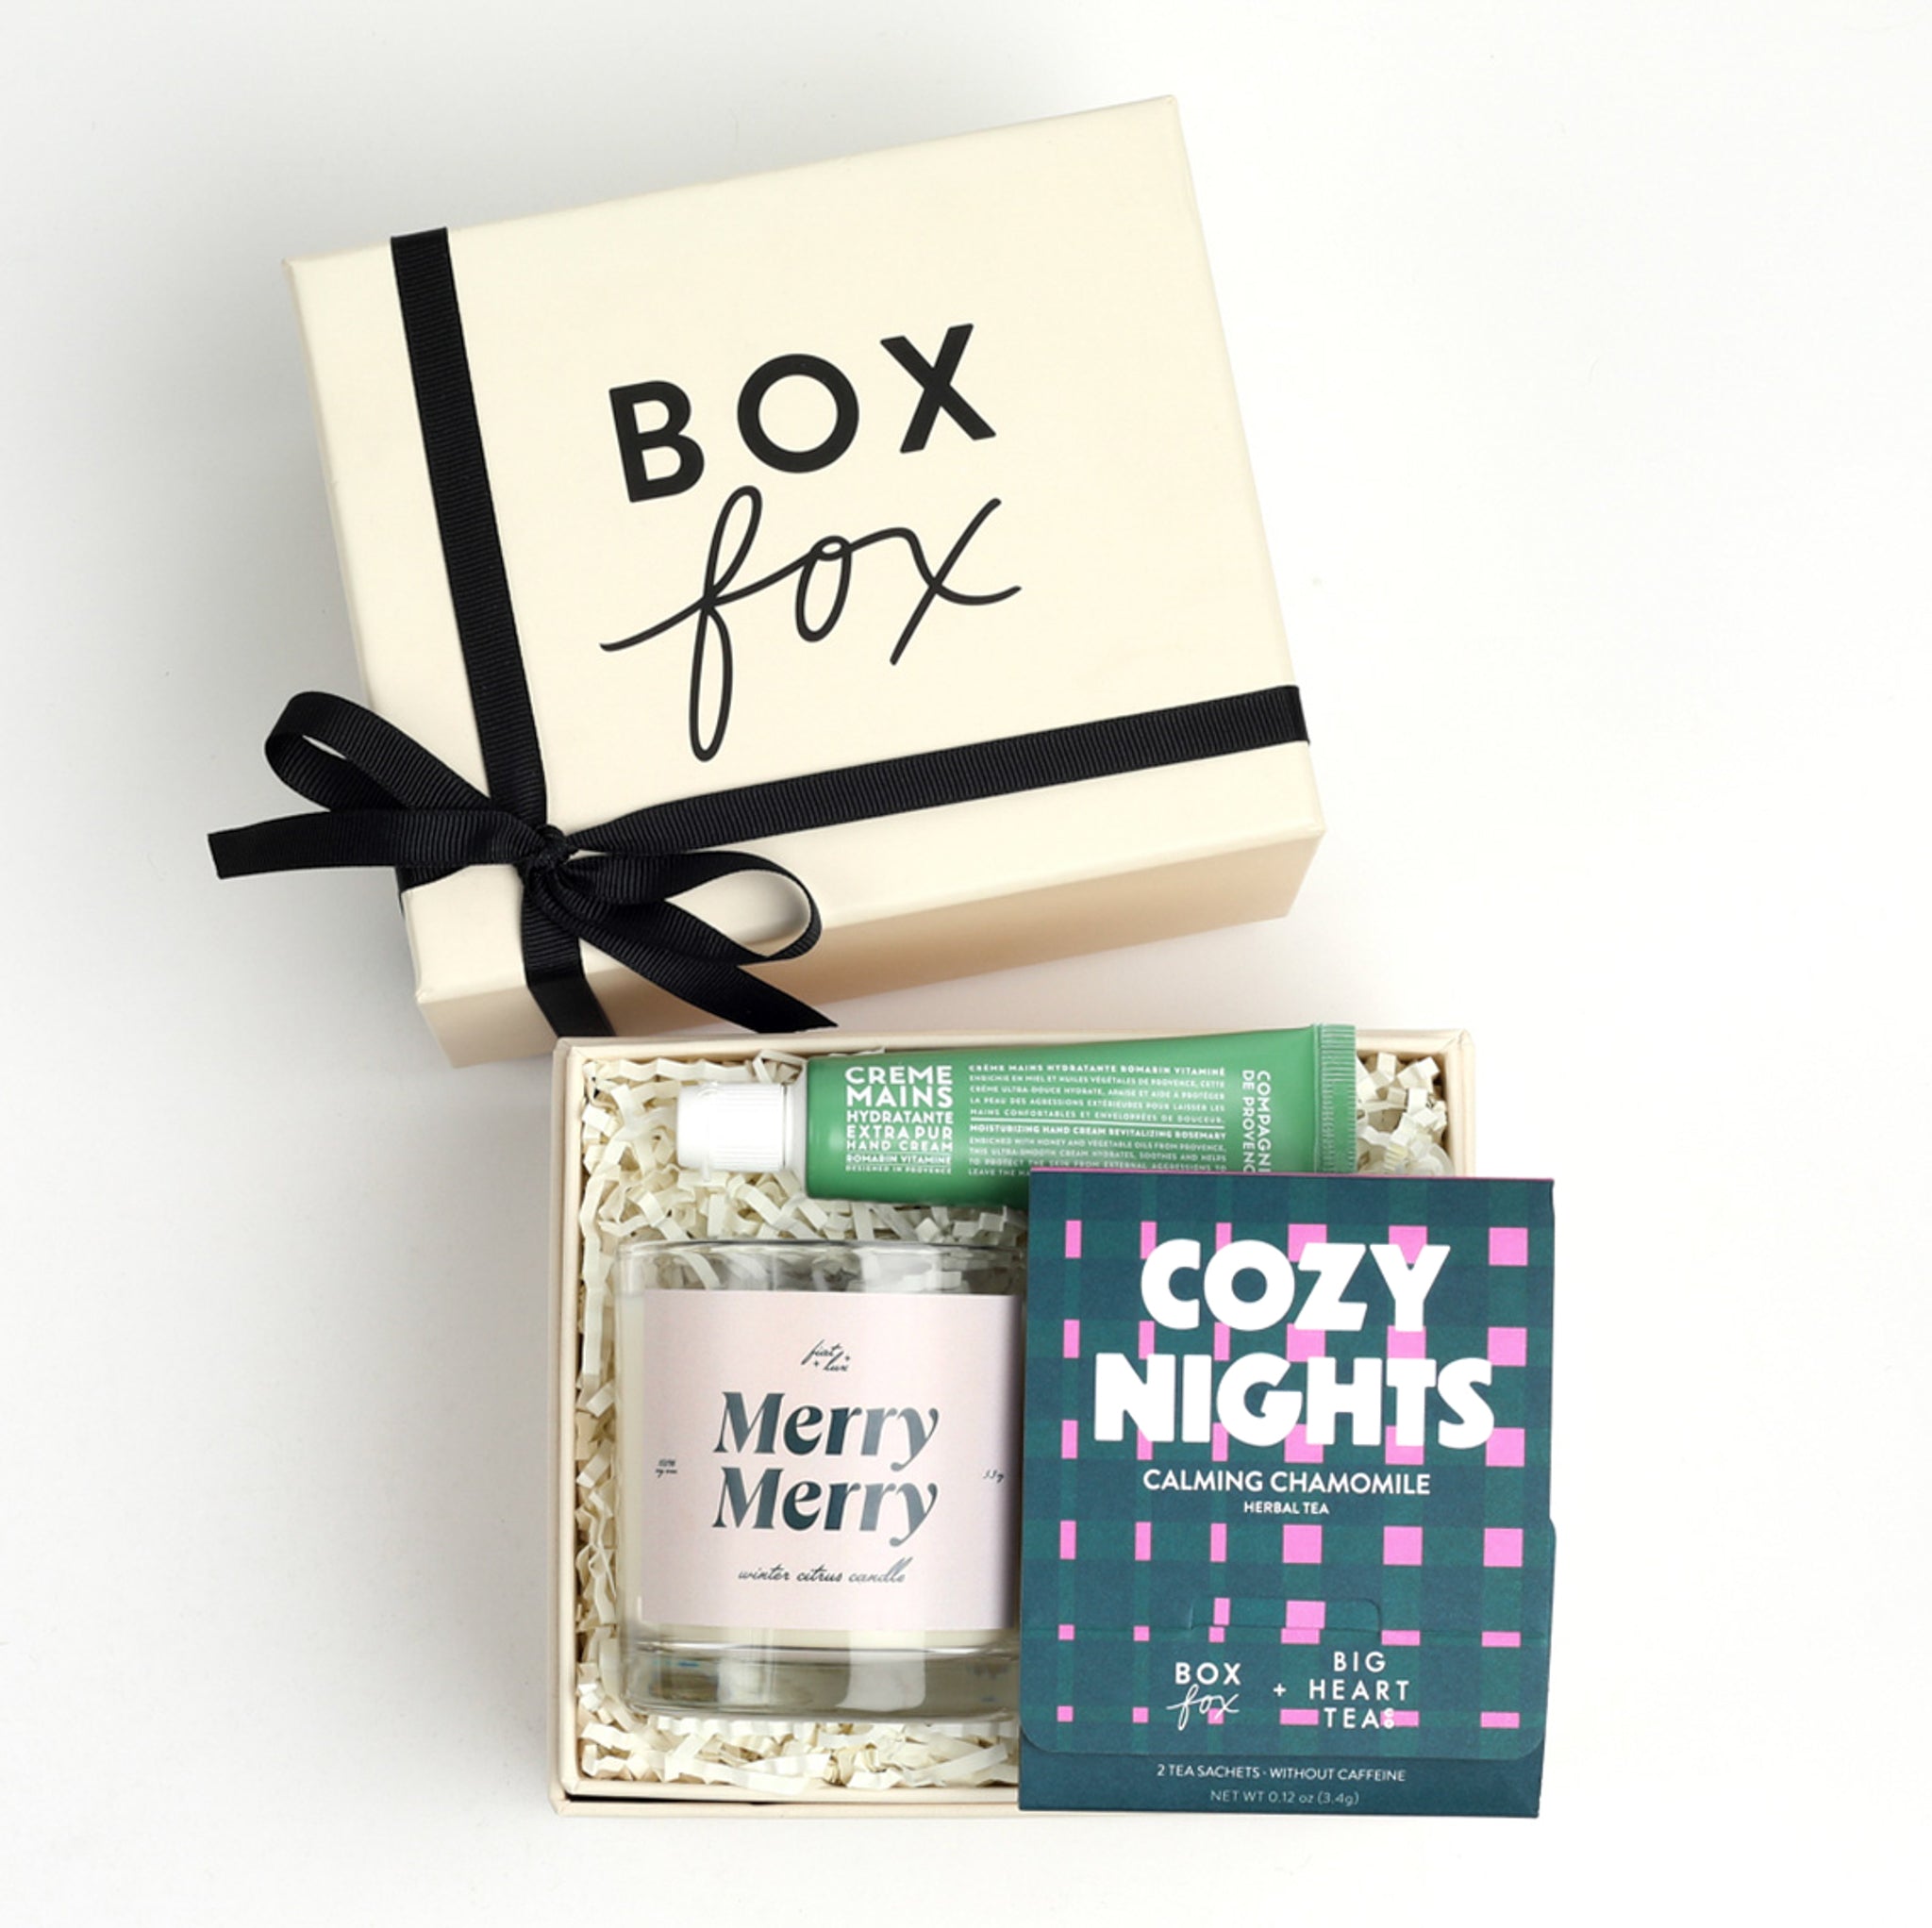 BOXFOX Mini creme gift box packed with rosemary hand creme, merry merry candle and cozy nights sachet tea